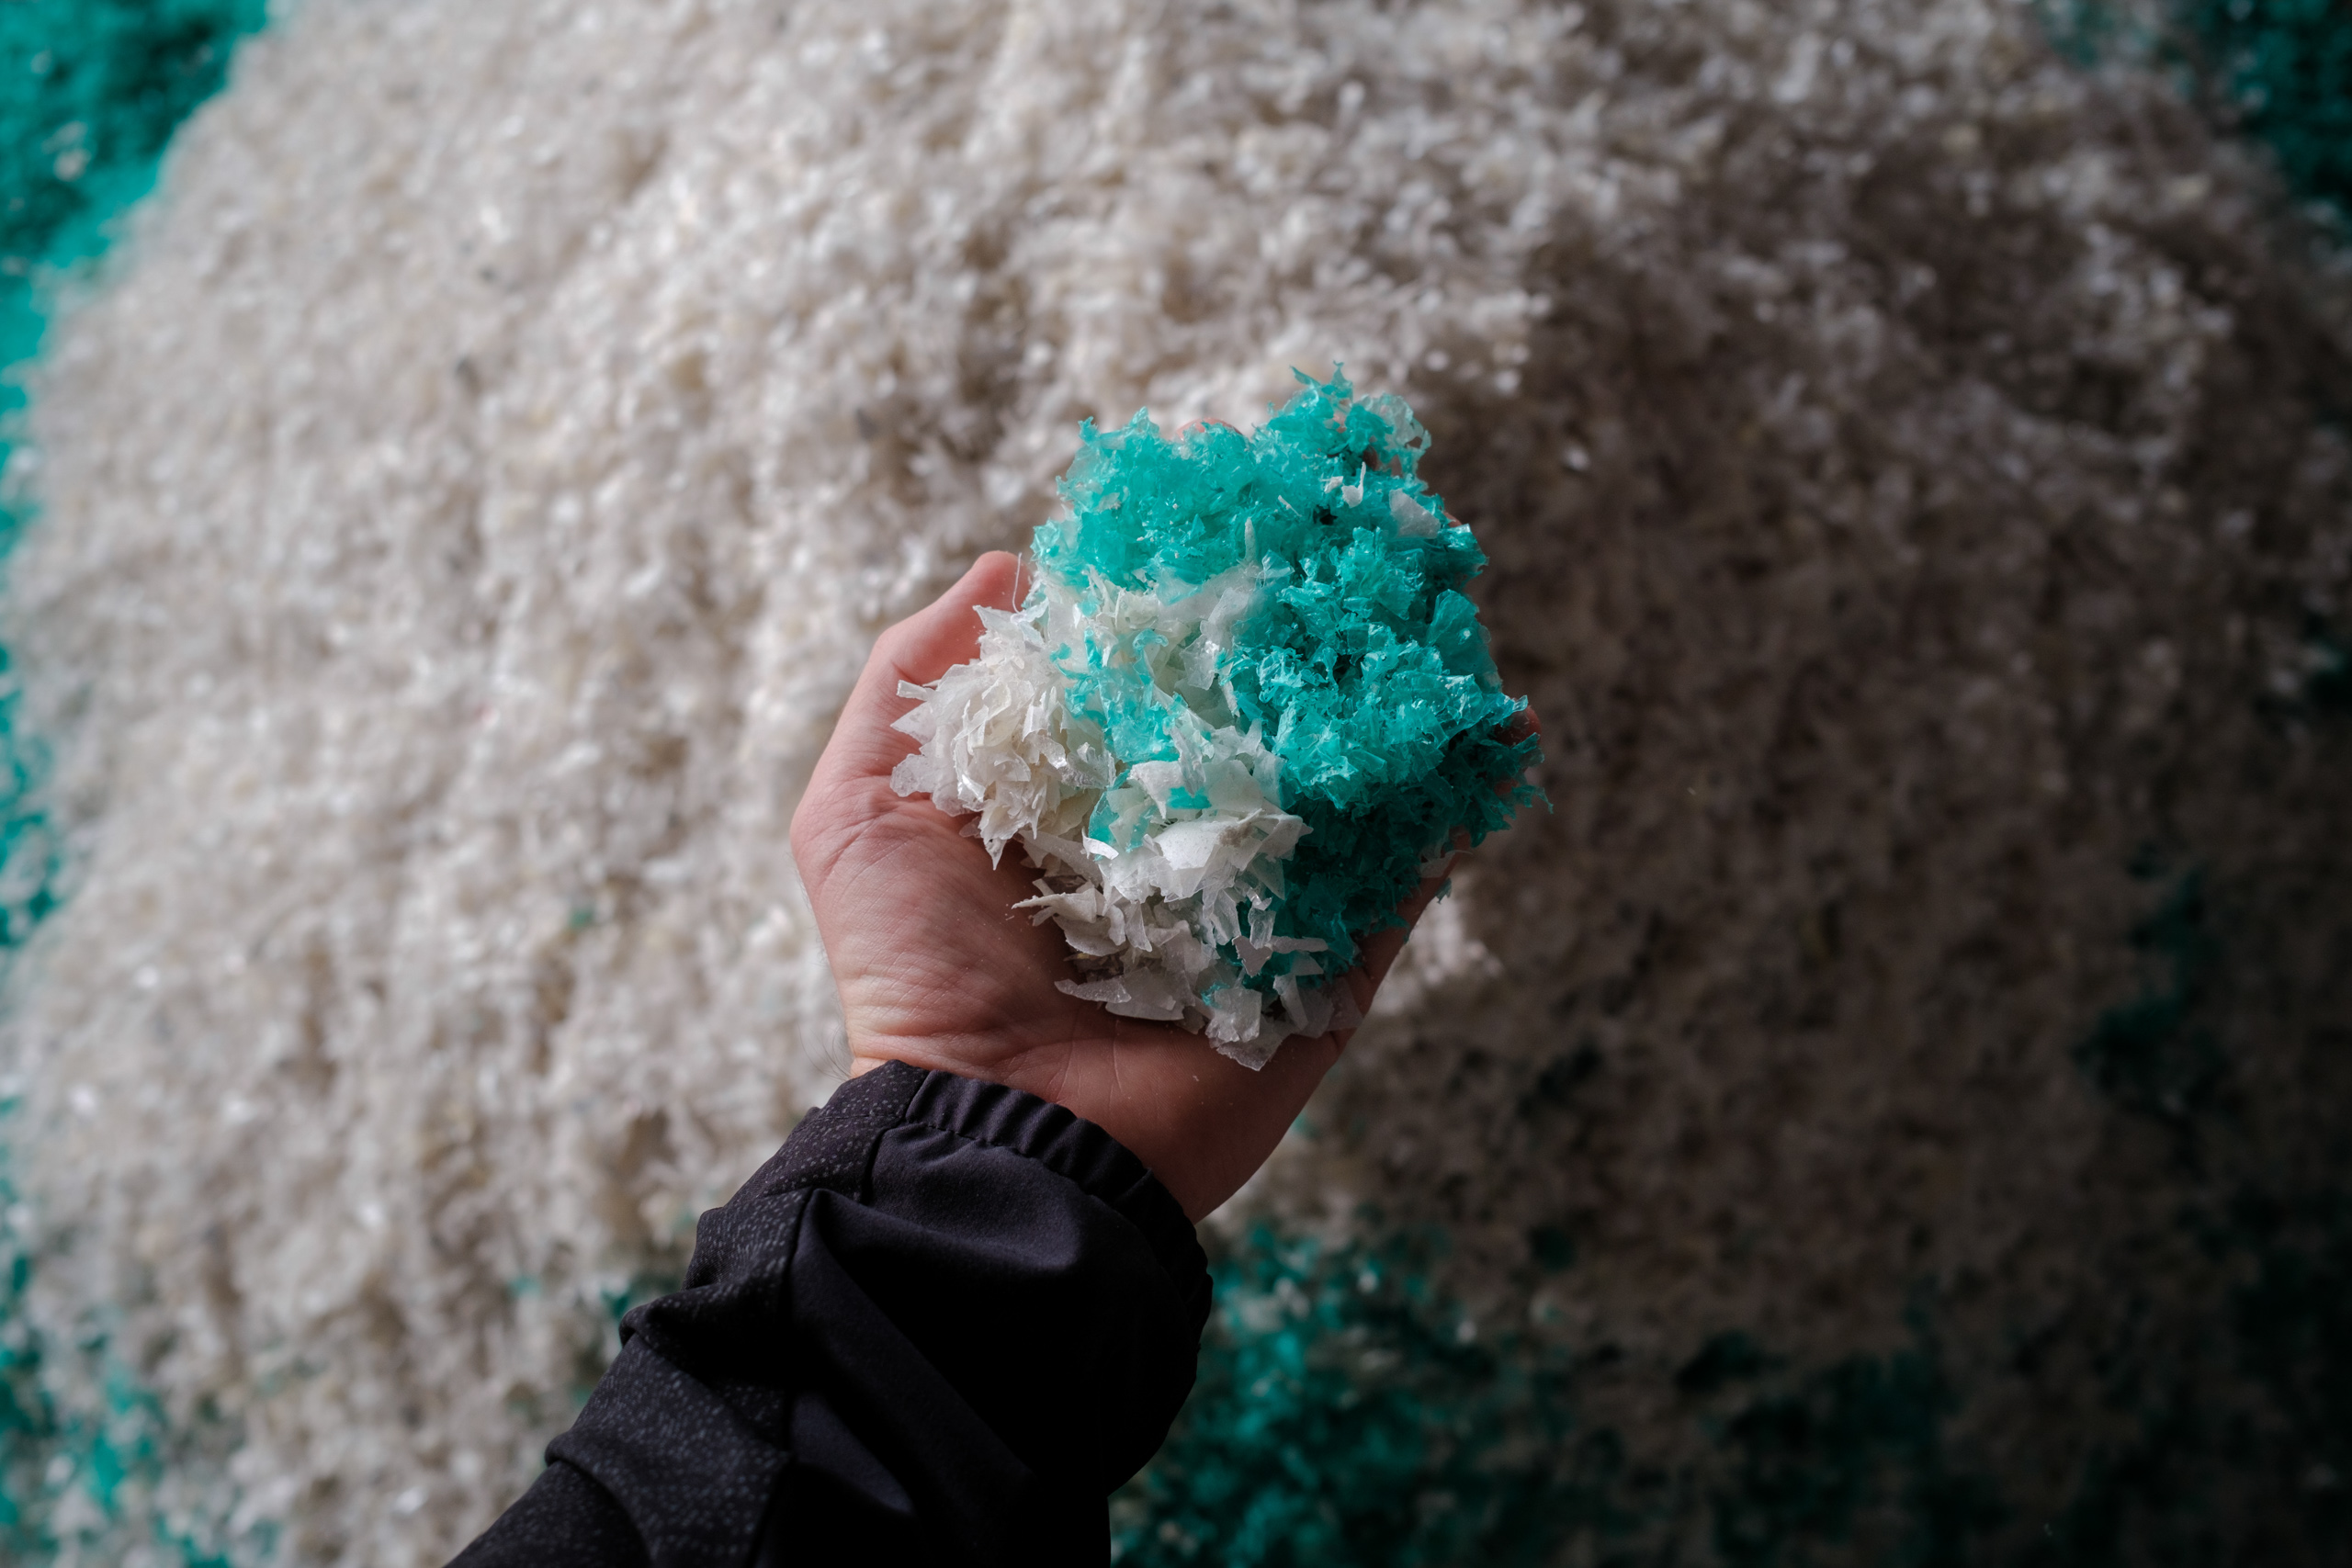 Post-industrial waste collected in southern Vietnam is turned into shreds